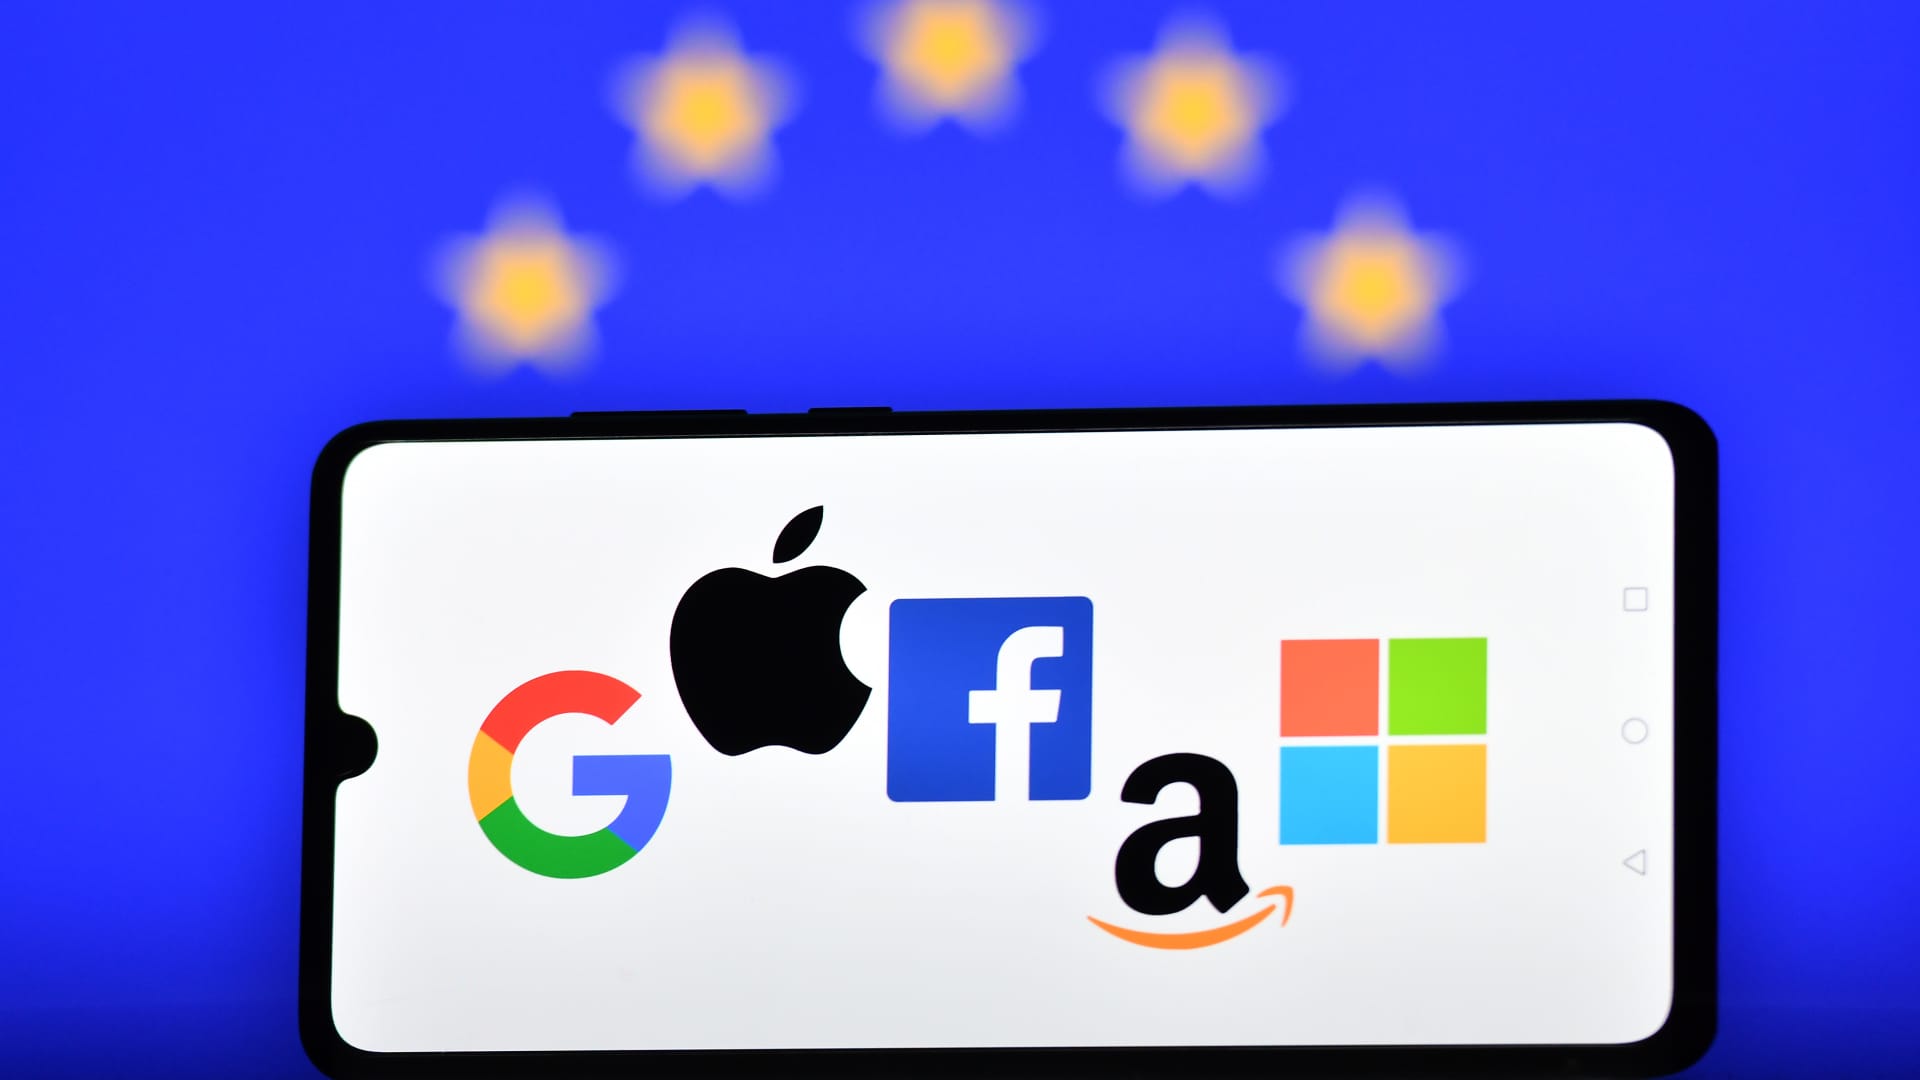 The logos of Google, Apple, Facebook, Amazon and Microsoft displayed on a mobile phone with an EU flag shown in the background.